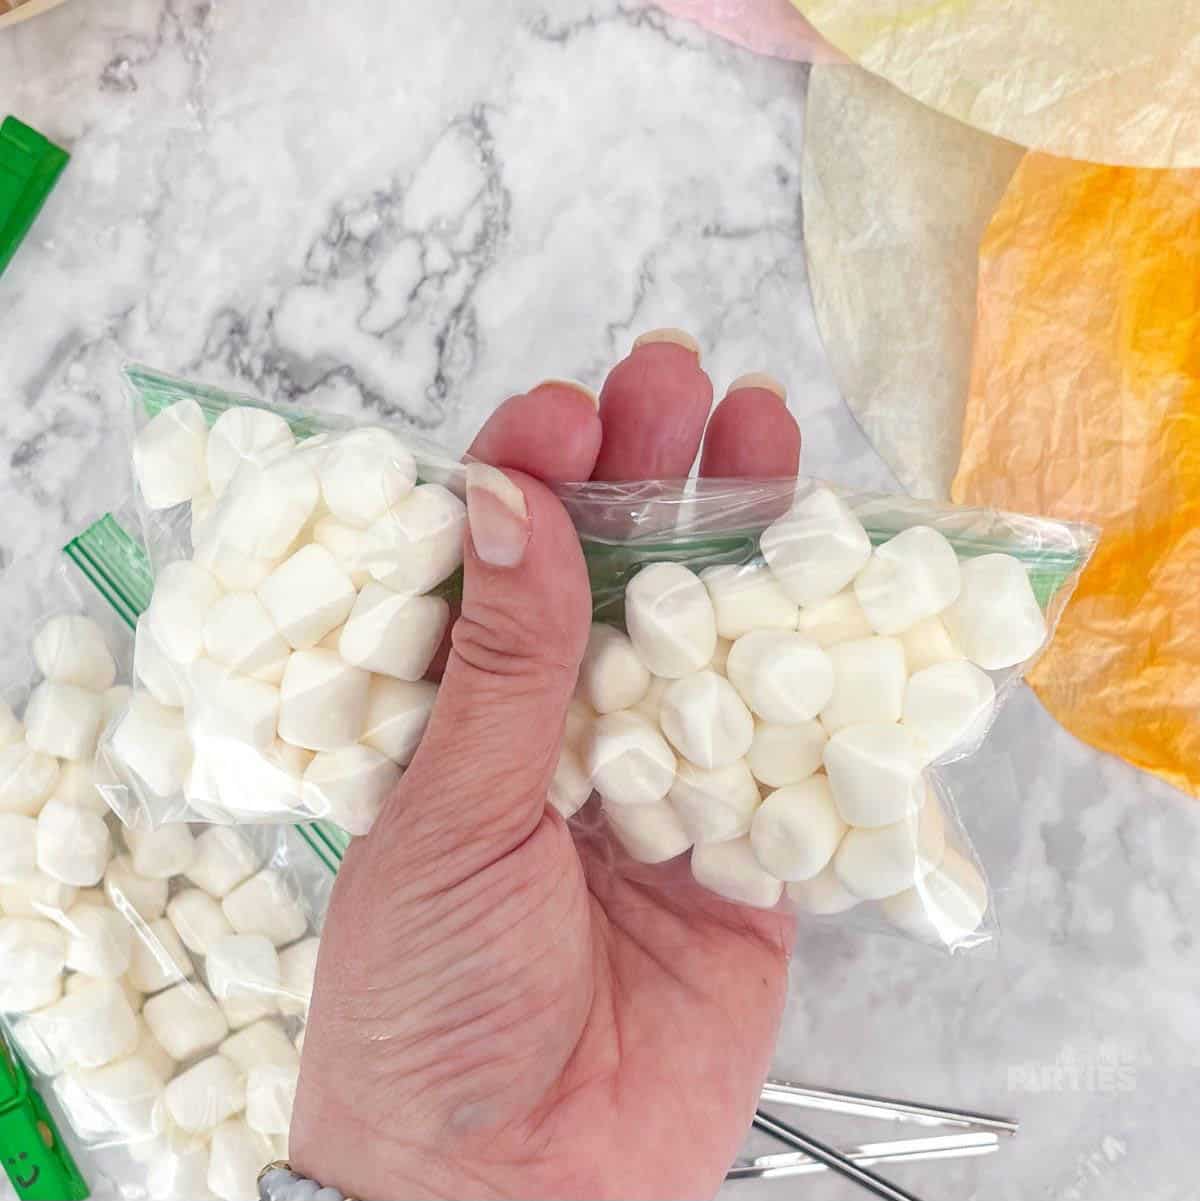 A woman's hand is dividing a bag of marshmallows.